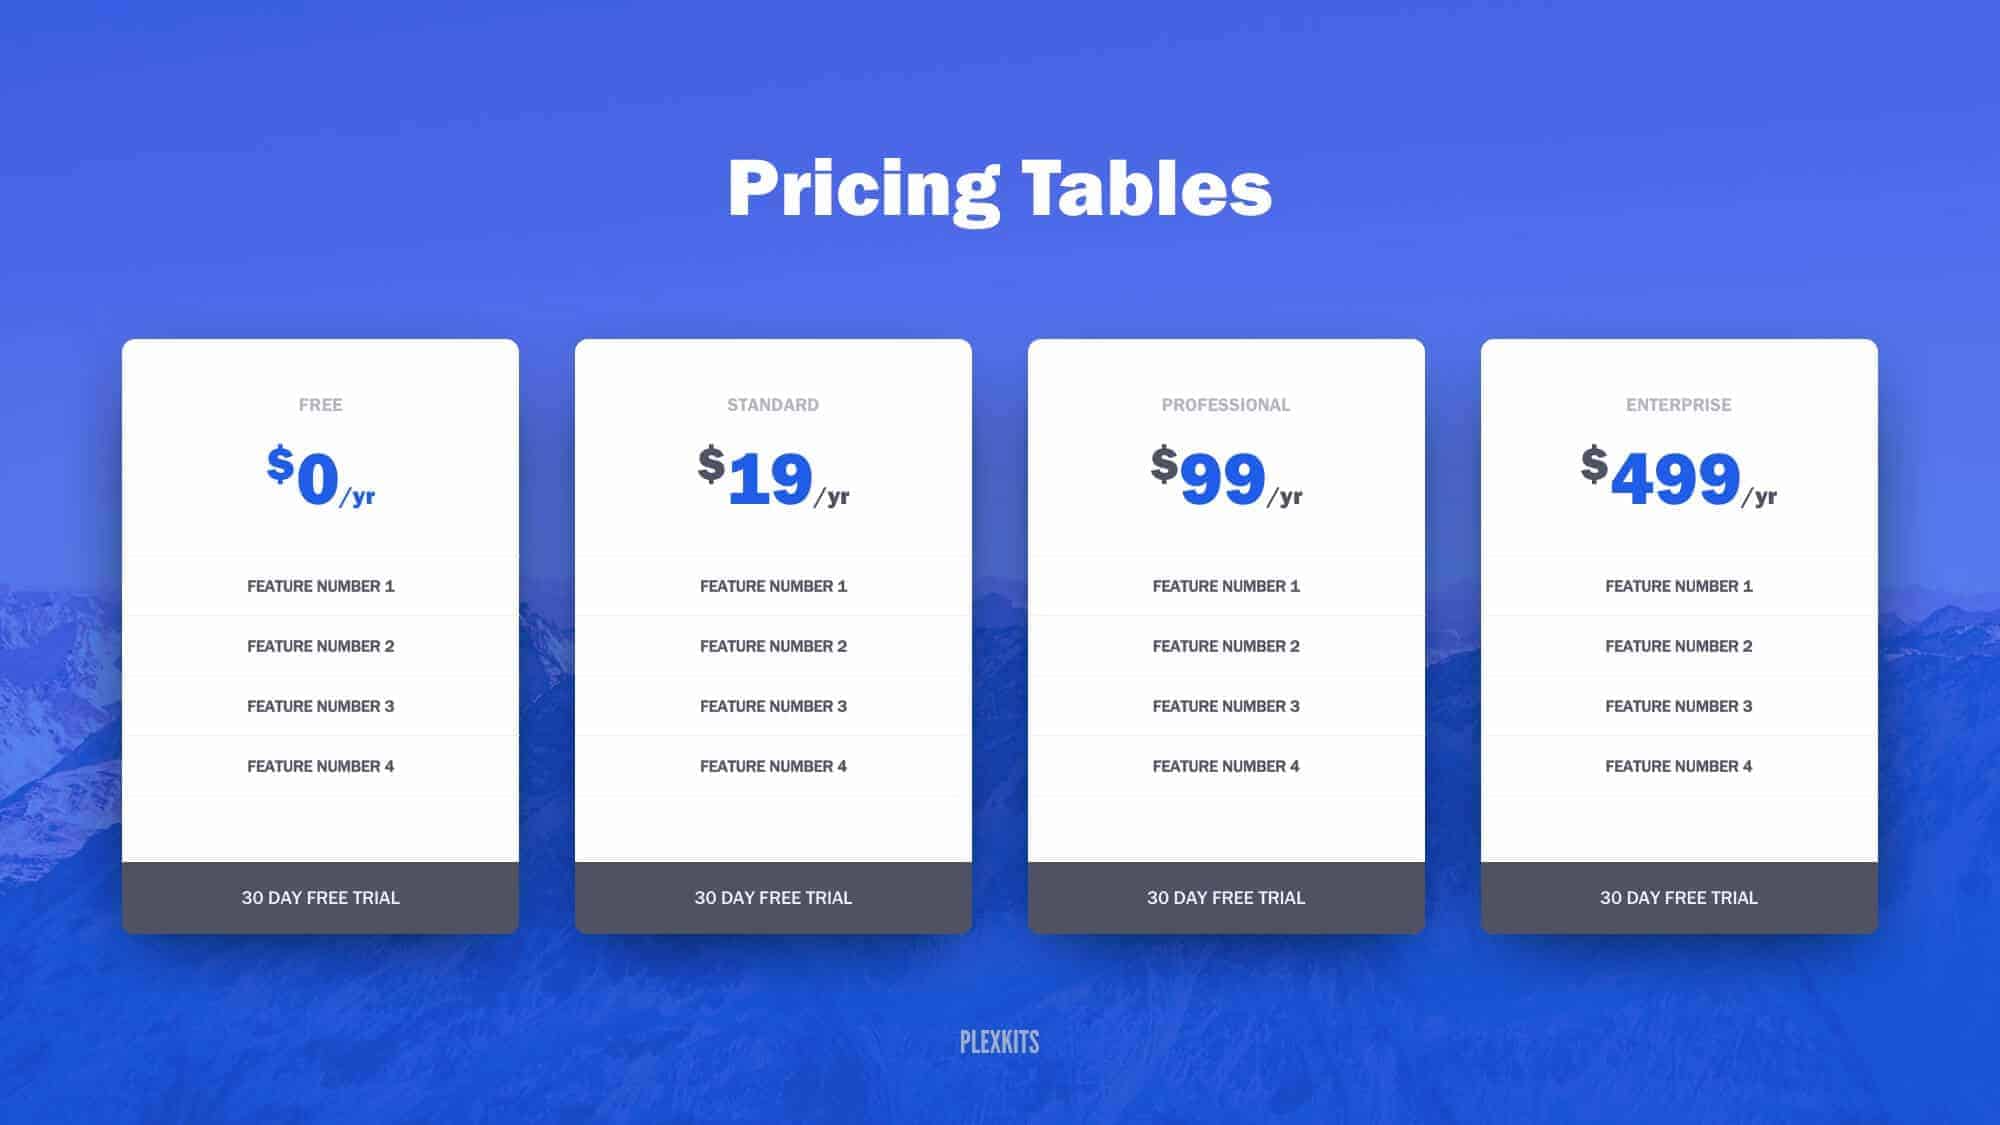 Pro features. Pricing. Таблица в POWERPOINT. Pricing Table. Price POWERPOINT.